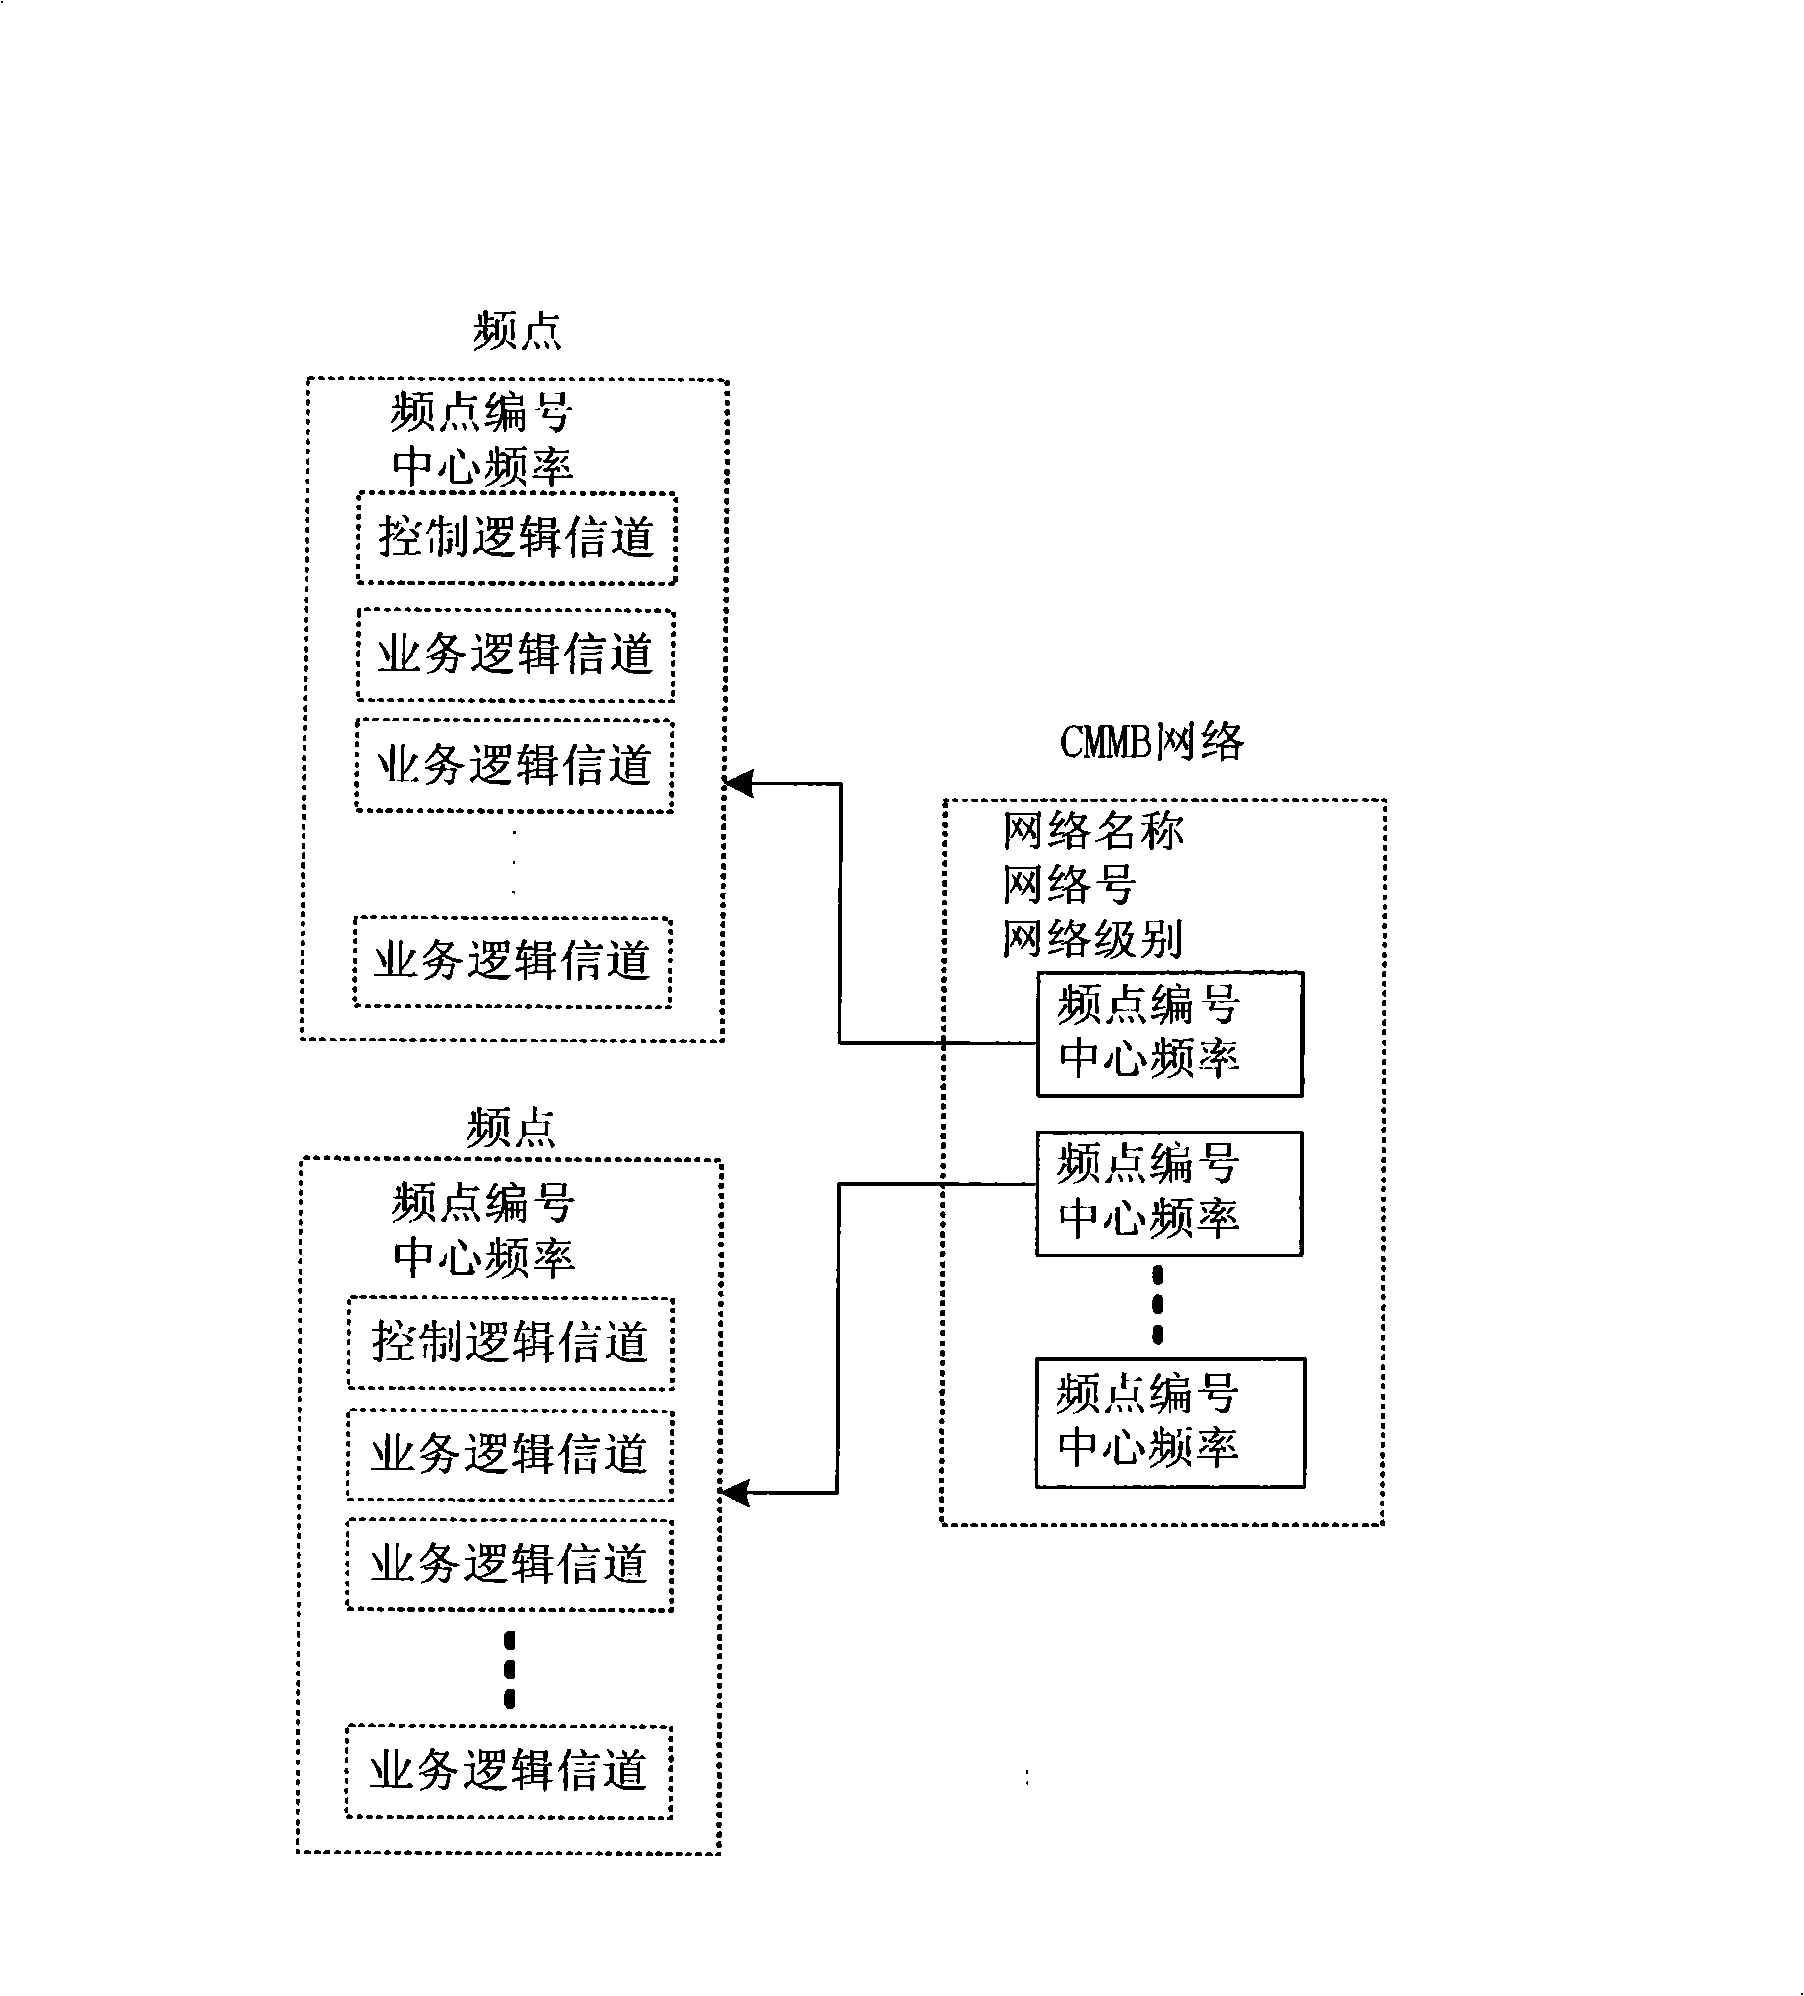 Method and apparatus for receiving electron service instruction data